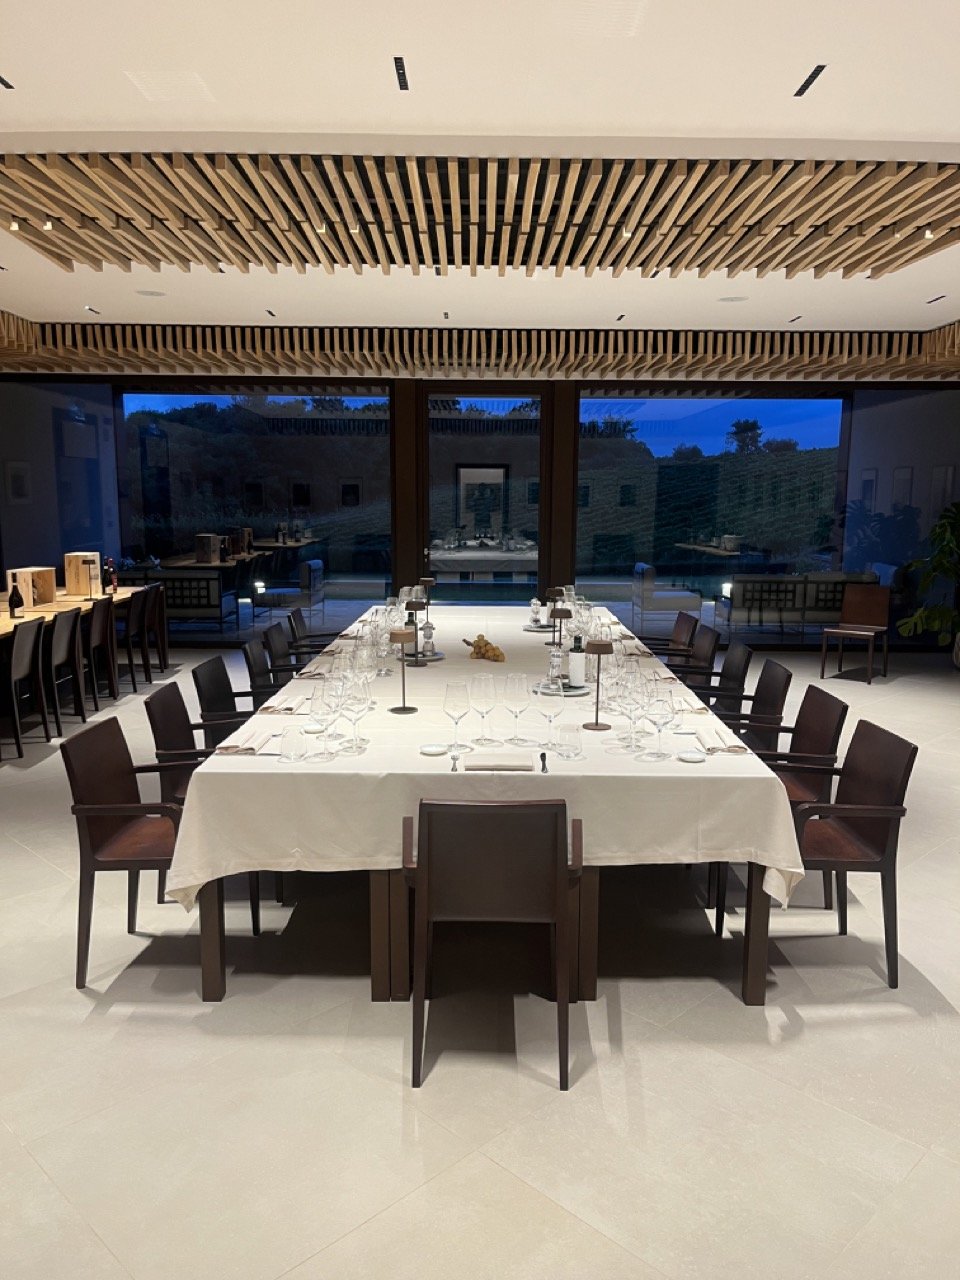 The wine tasting room with a large table, elegantly set with wine glasses and silverware in preparation for a wine tasting at the Vallepicciola winery in Tuscany's Chianti region.